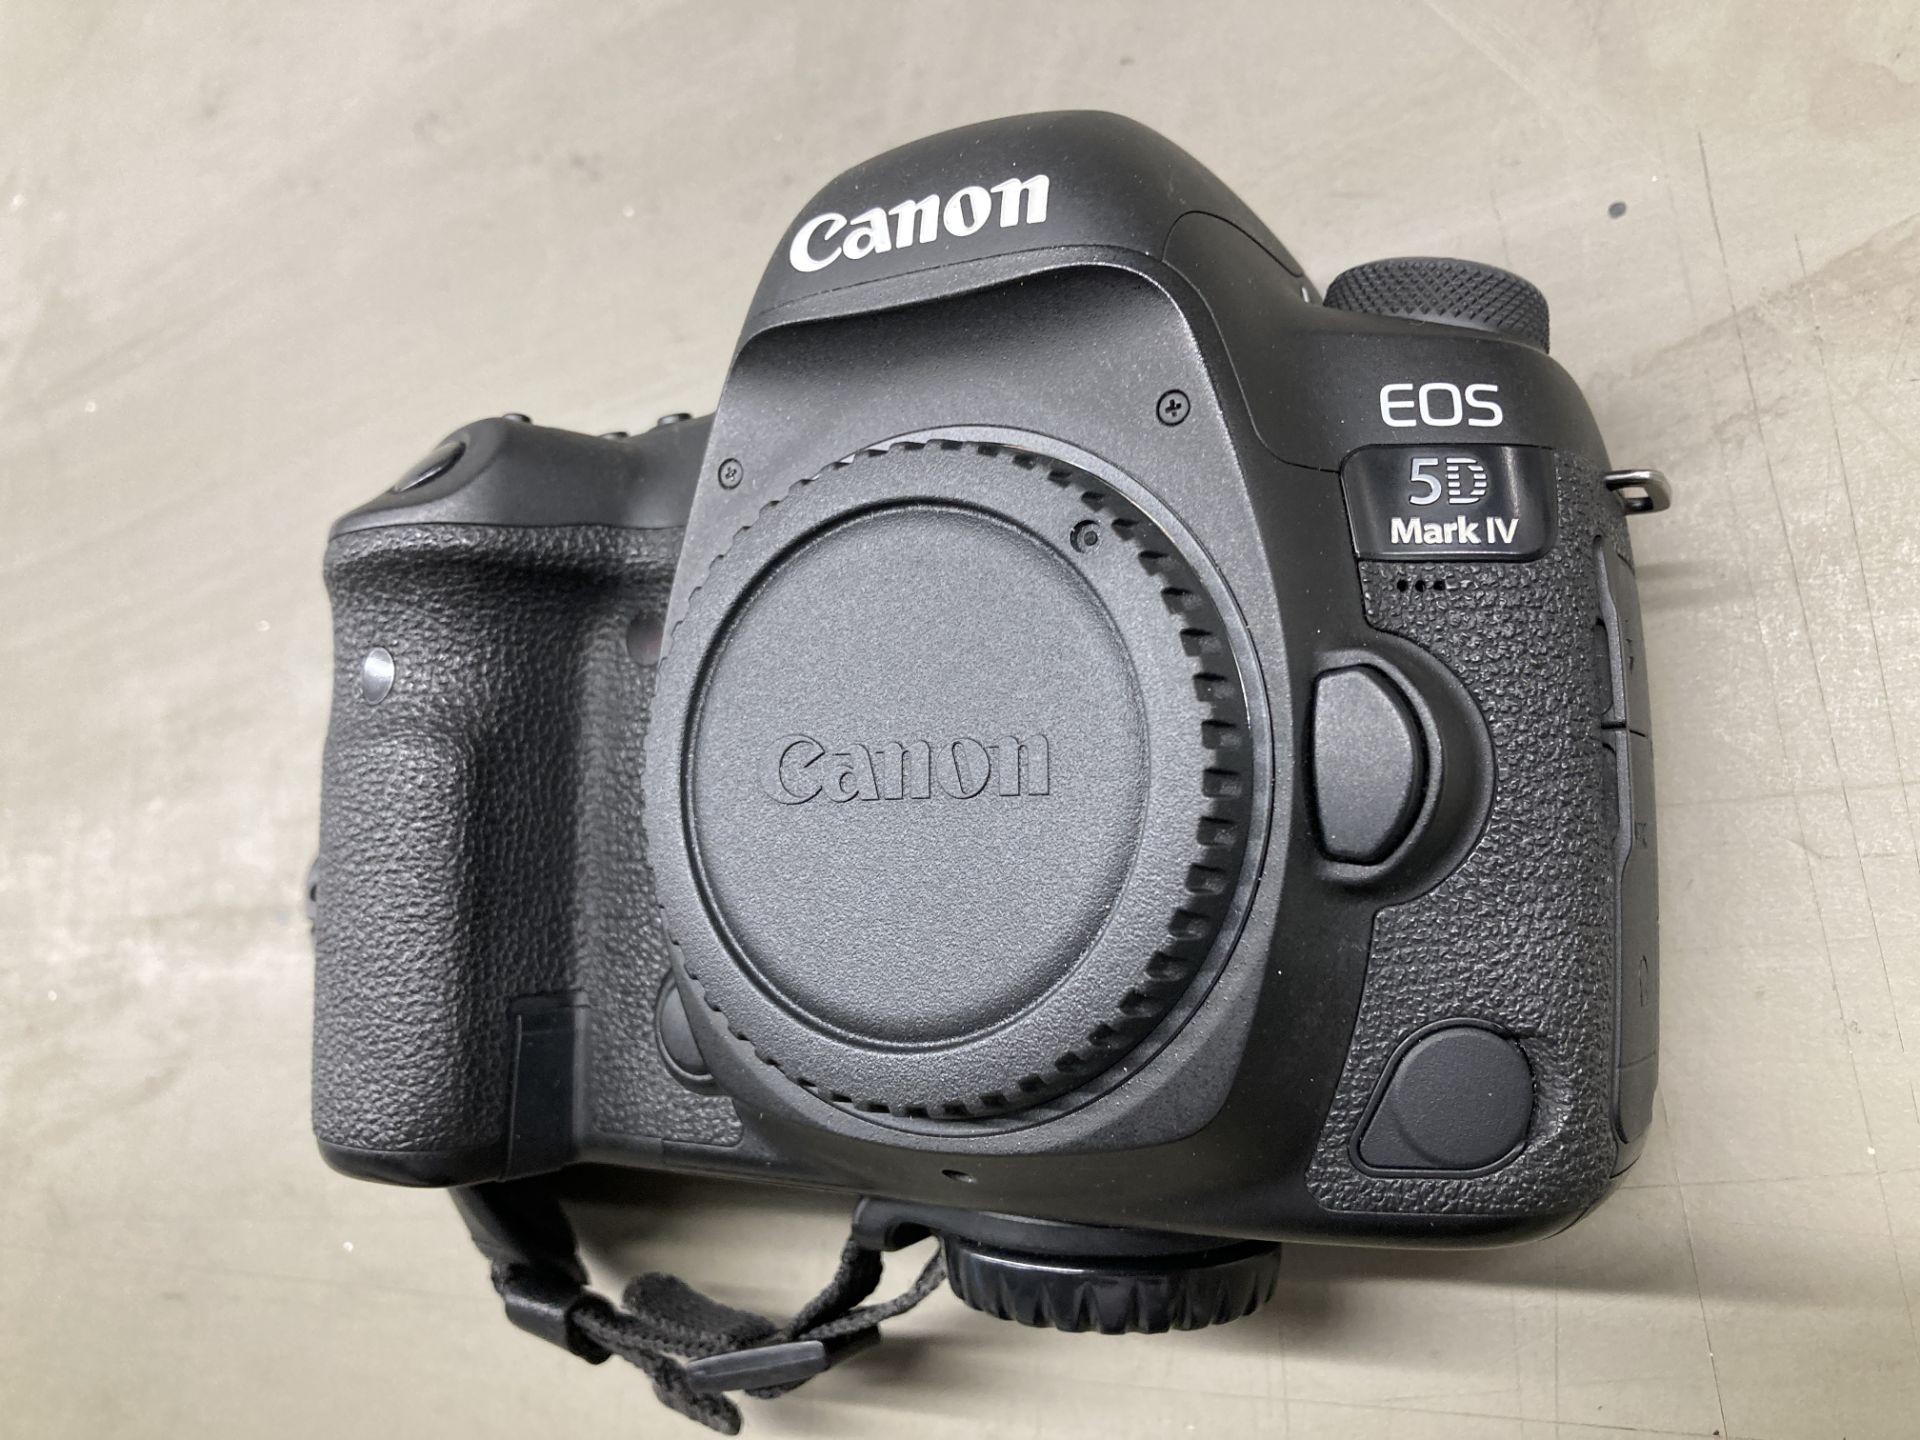 Canon EOS 5D Mark IV (WG) DSLR camera body with charger, spare batteries and leads - Image 12 of 22